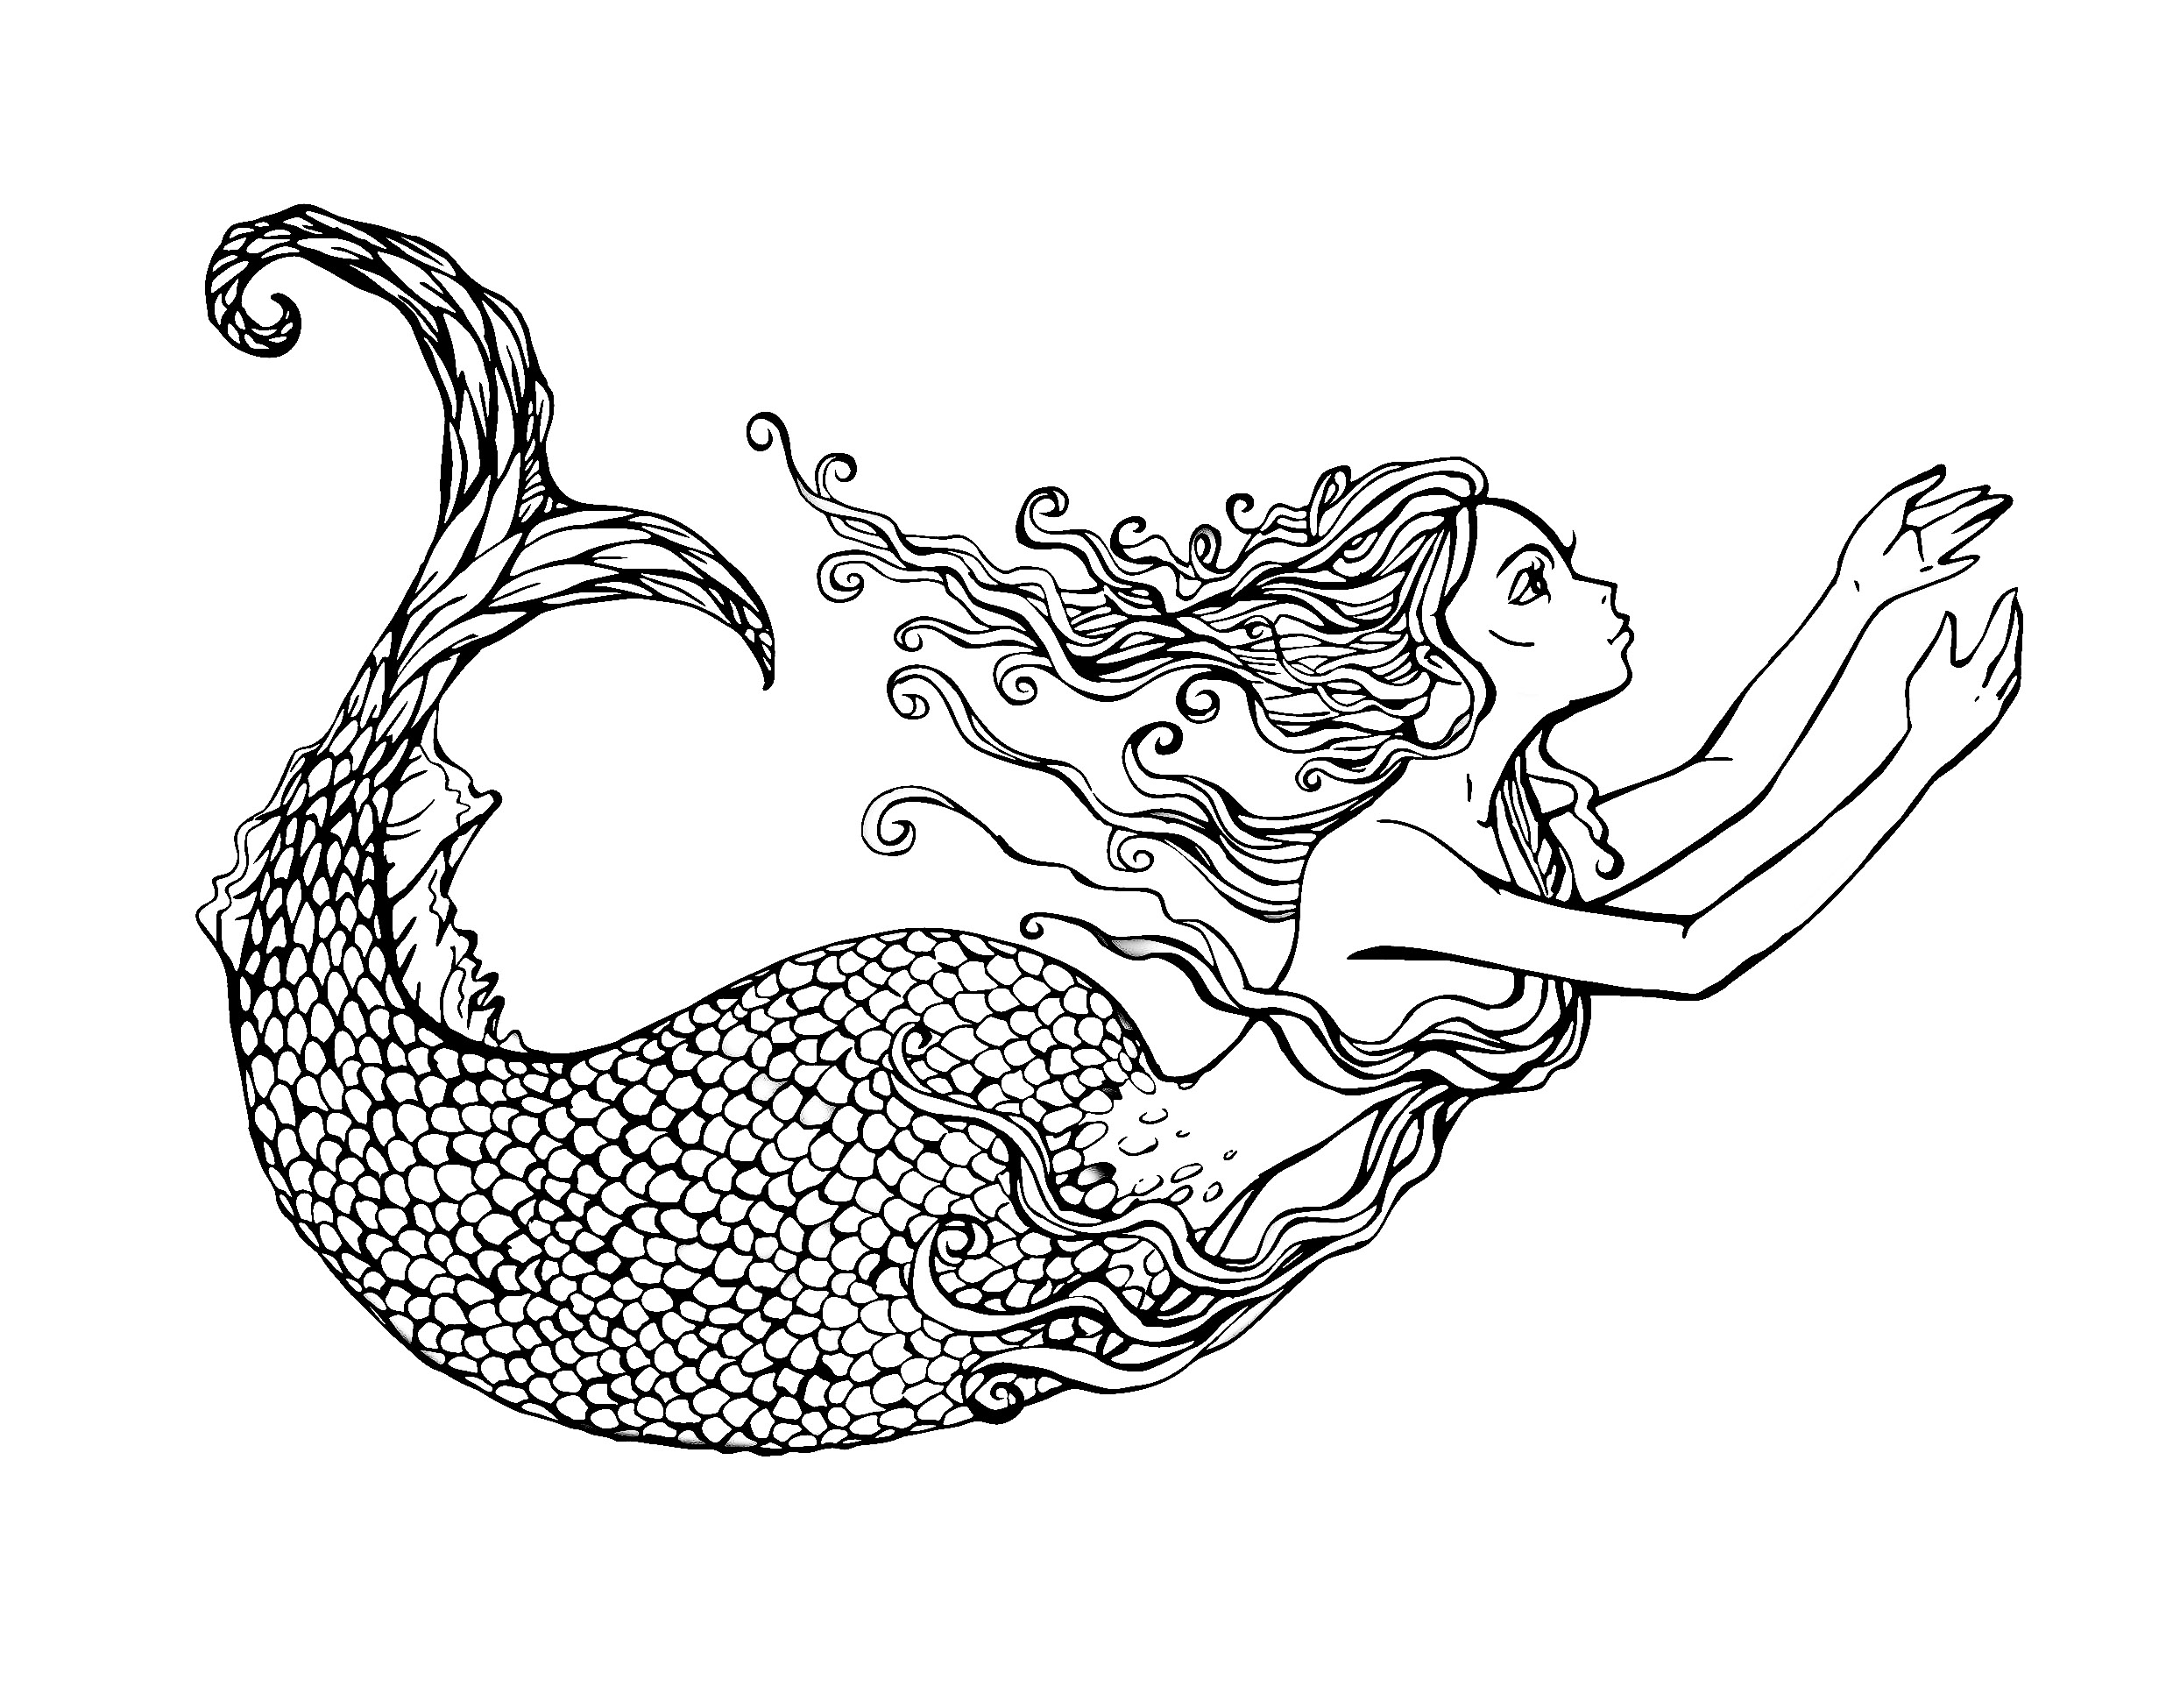 Mermaids coloring pages to print for kids